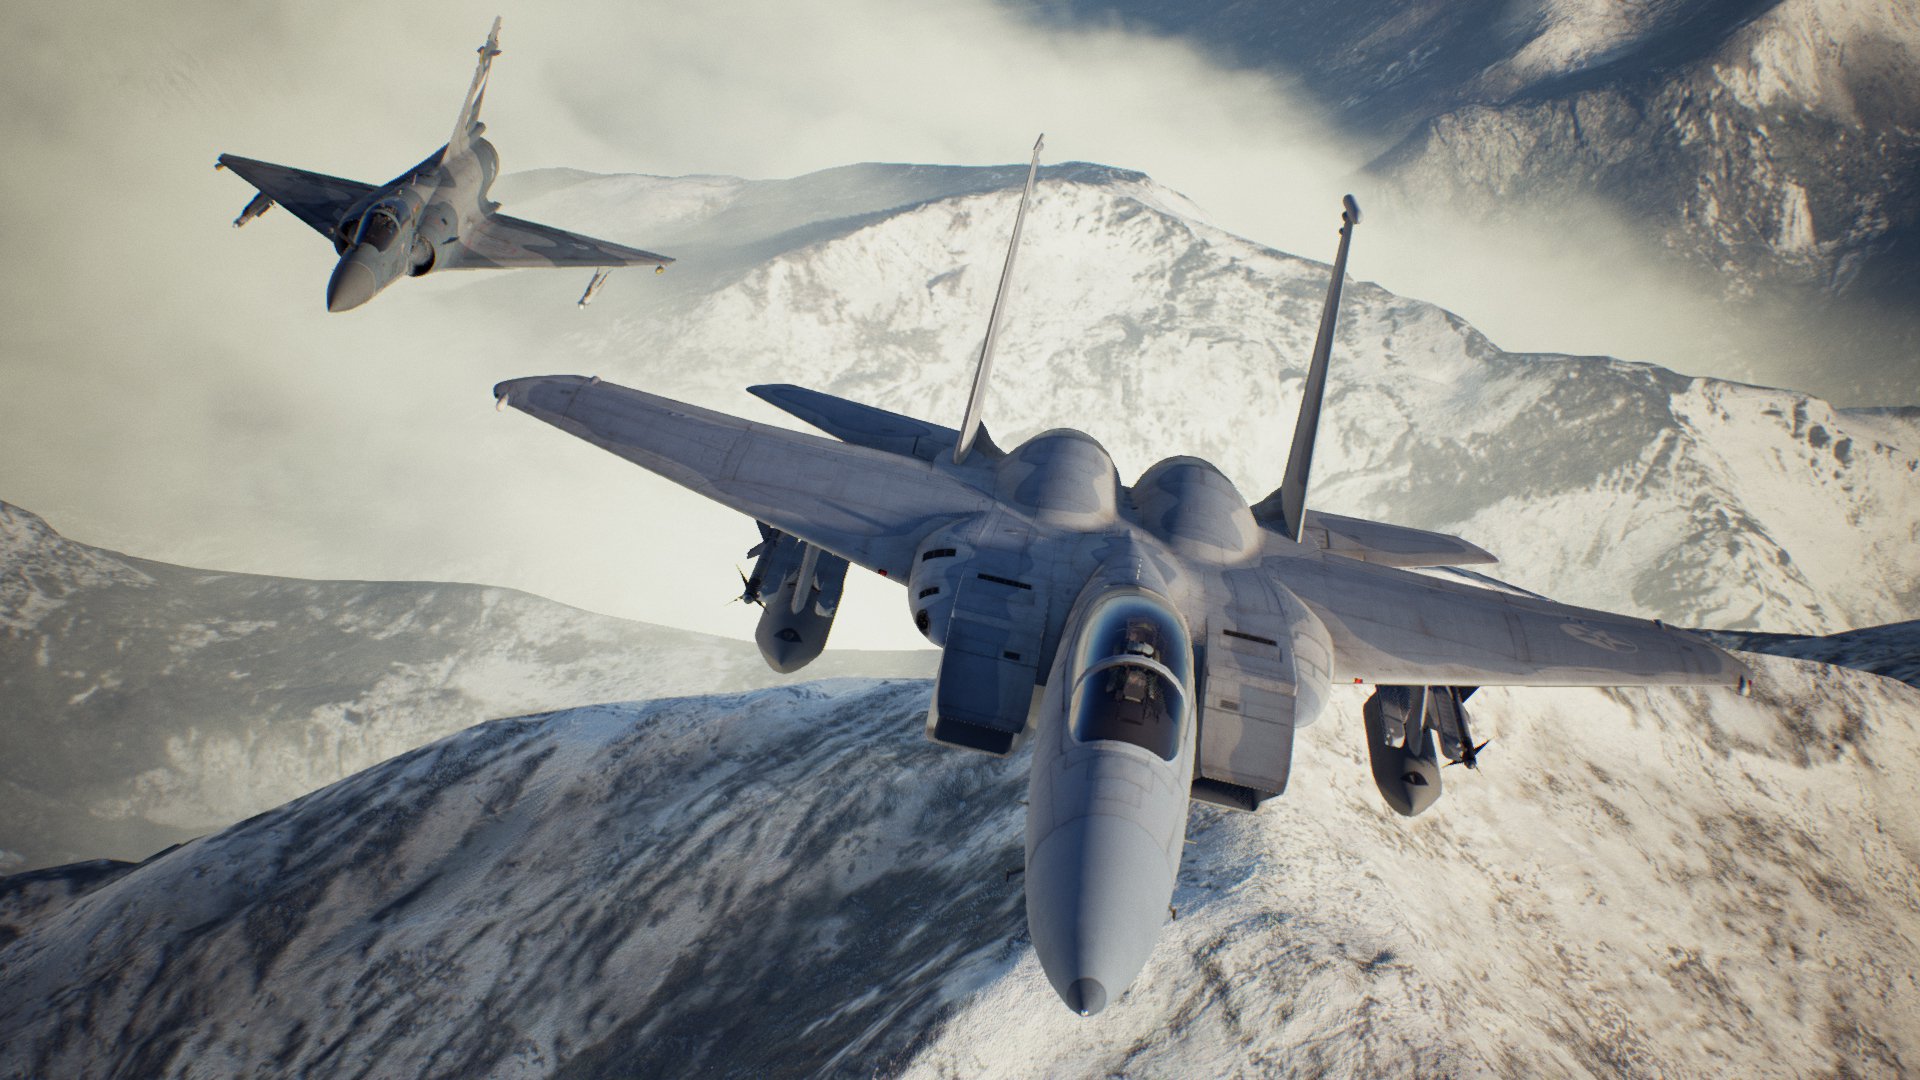 Ace Combat 7 Skies Unknown 10